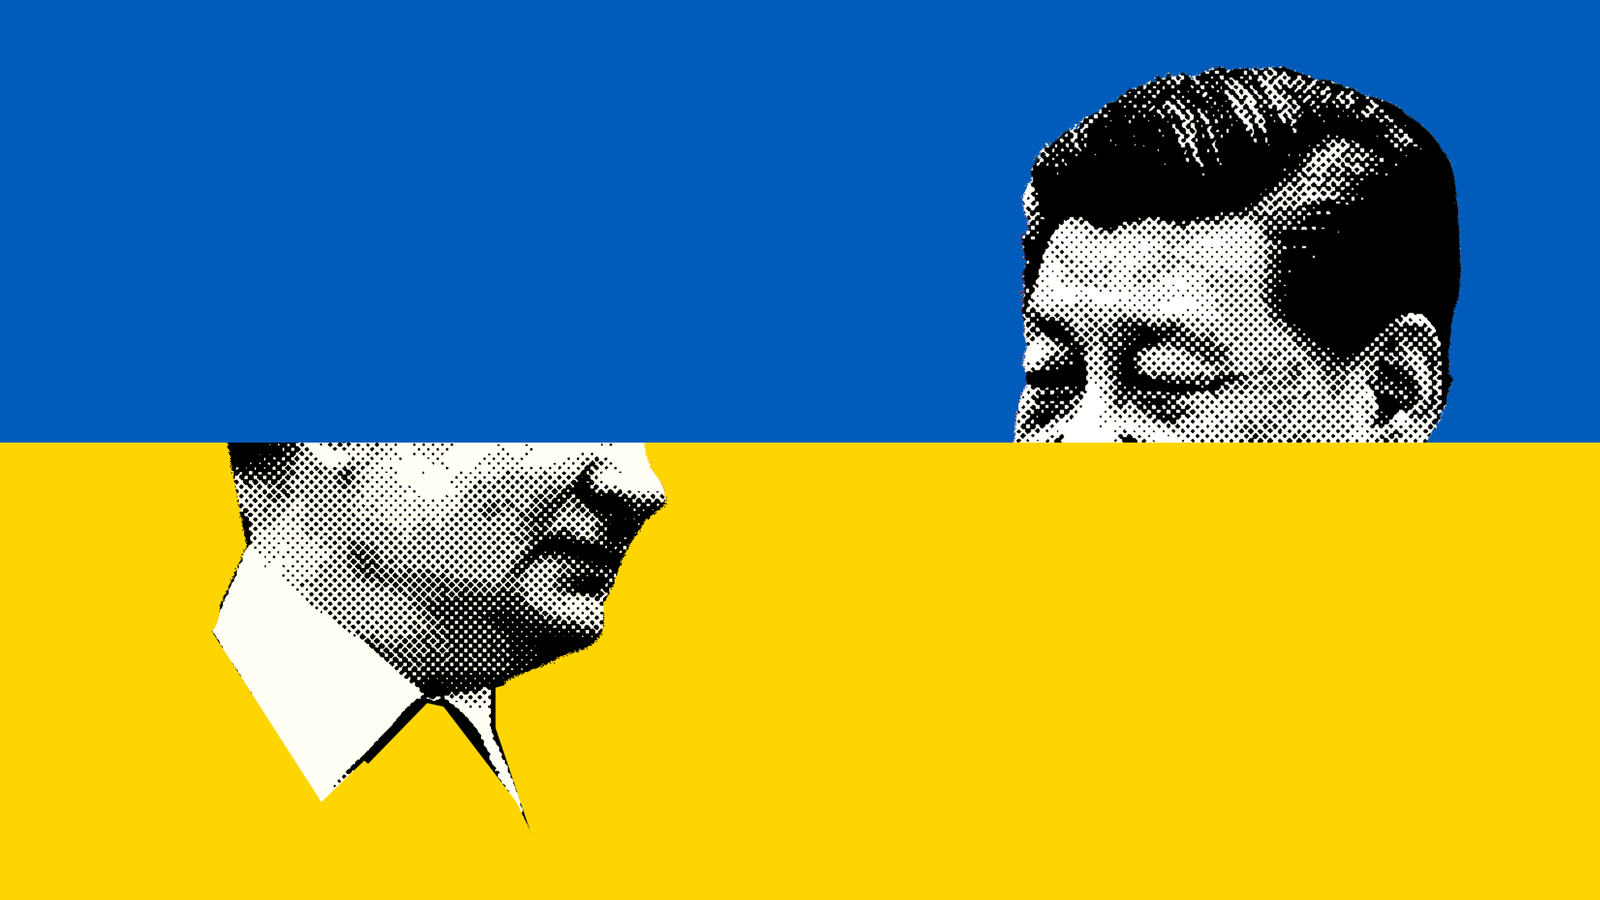 China's Risky Relationship With Russia - The Atlantic